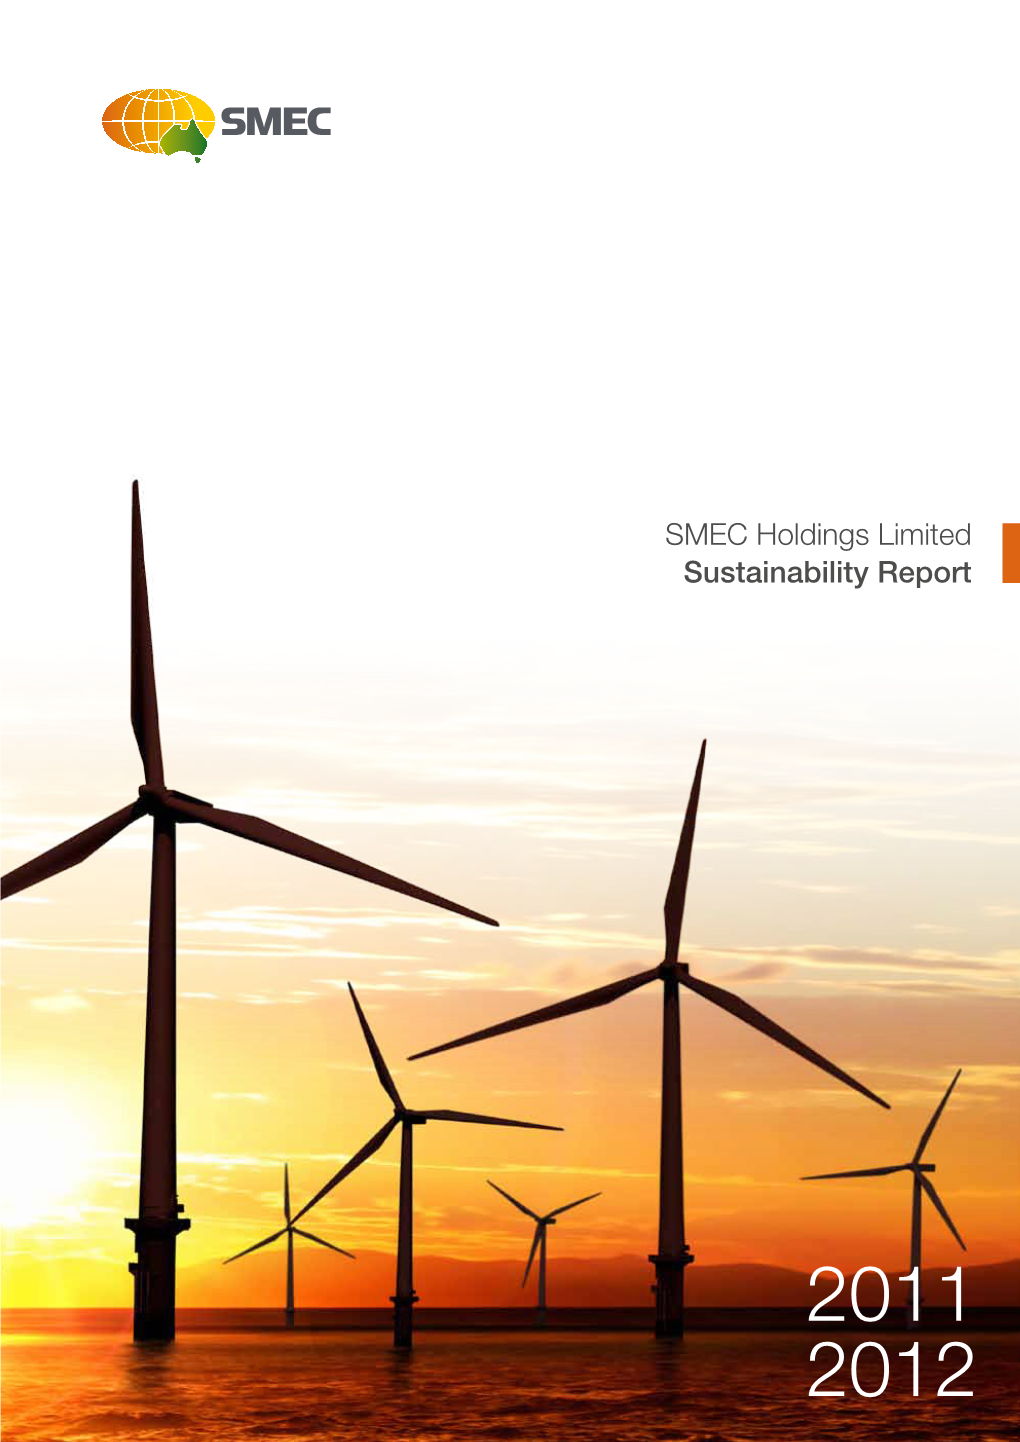 SMEC Holdings Limited Sustainability Report